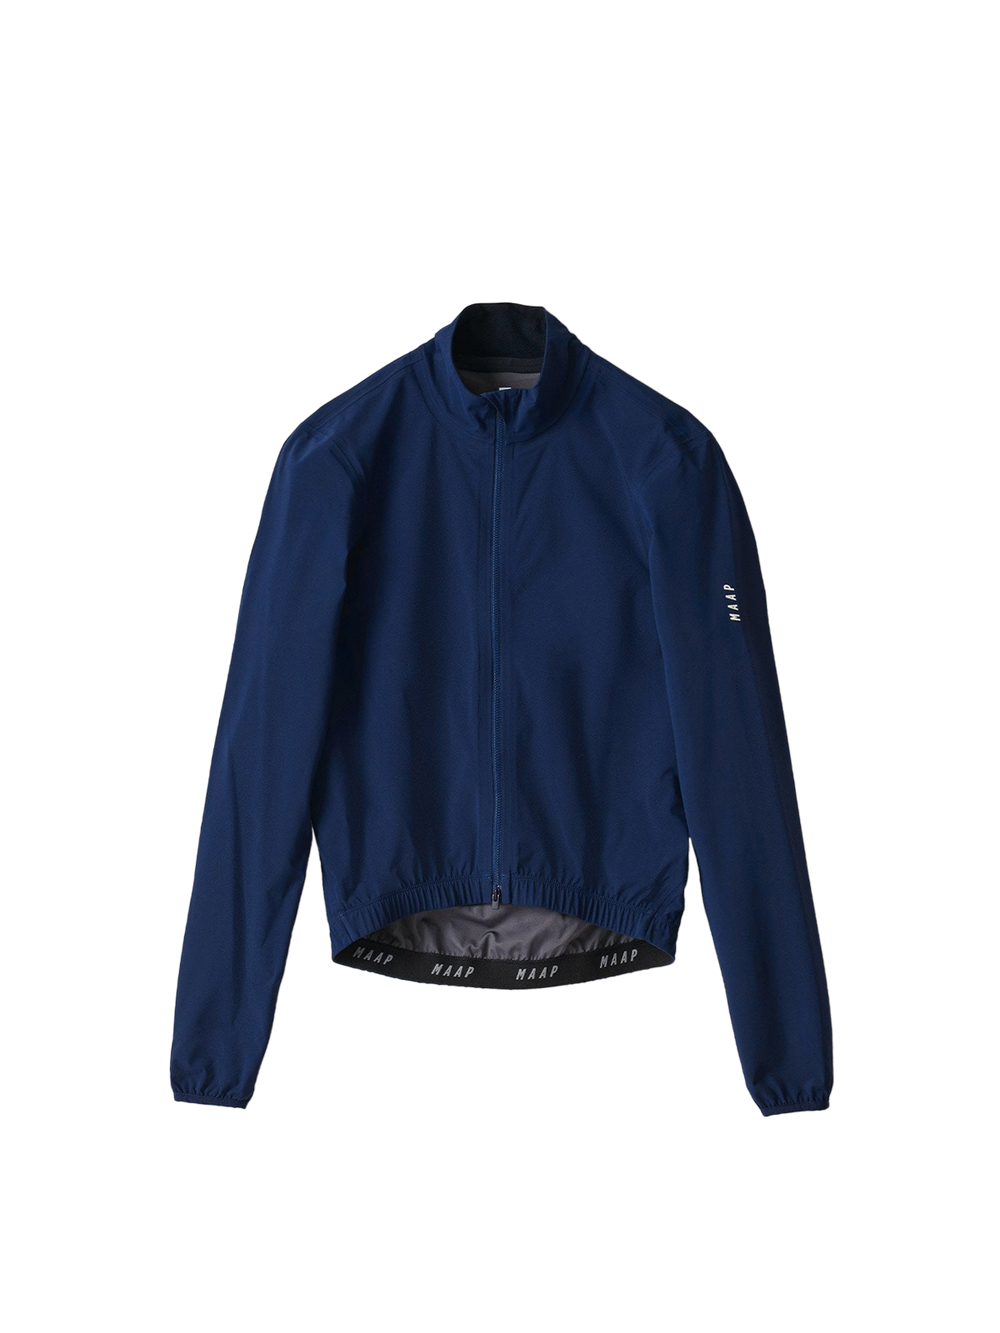 Product Image for Women's Prime Jacket